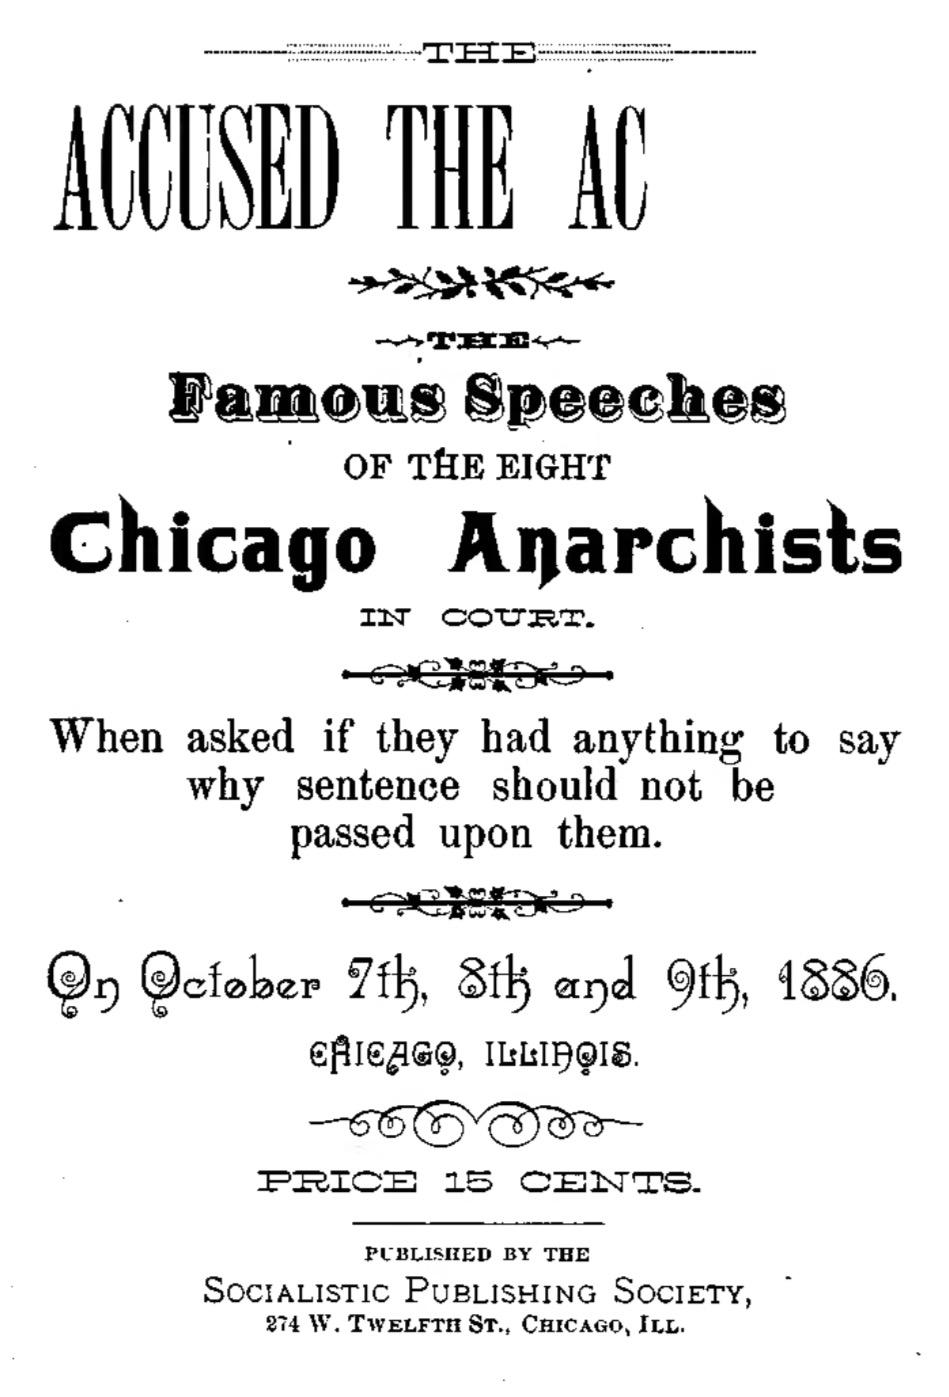 The Accused the Accusers : The Famous Speeches of the Eight Chicago Anarchists in Court (1886) by August Spies, Michel Schwab, Oscar Neebe, Adolph Fischer, Louis Lingg, George Engel, Samuel Fielden, Albert R. Parsons